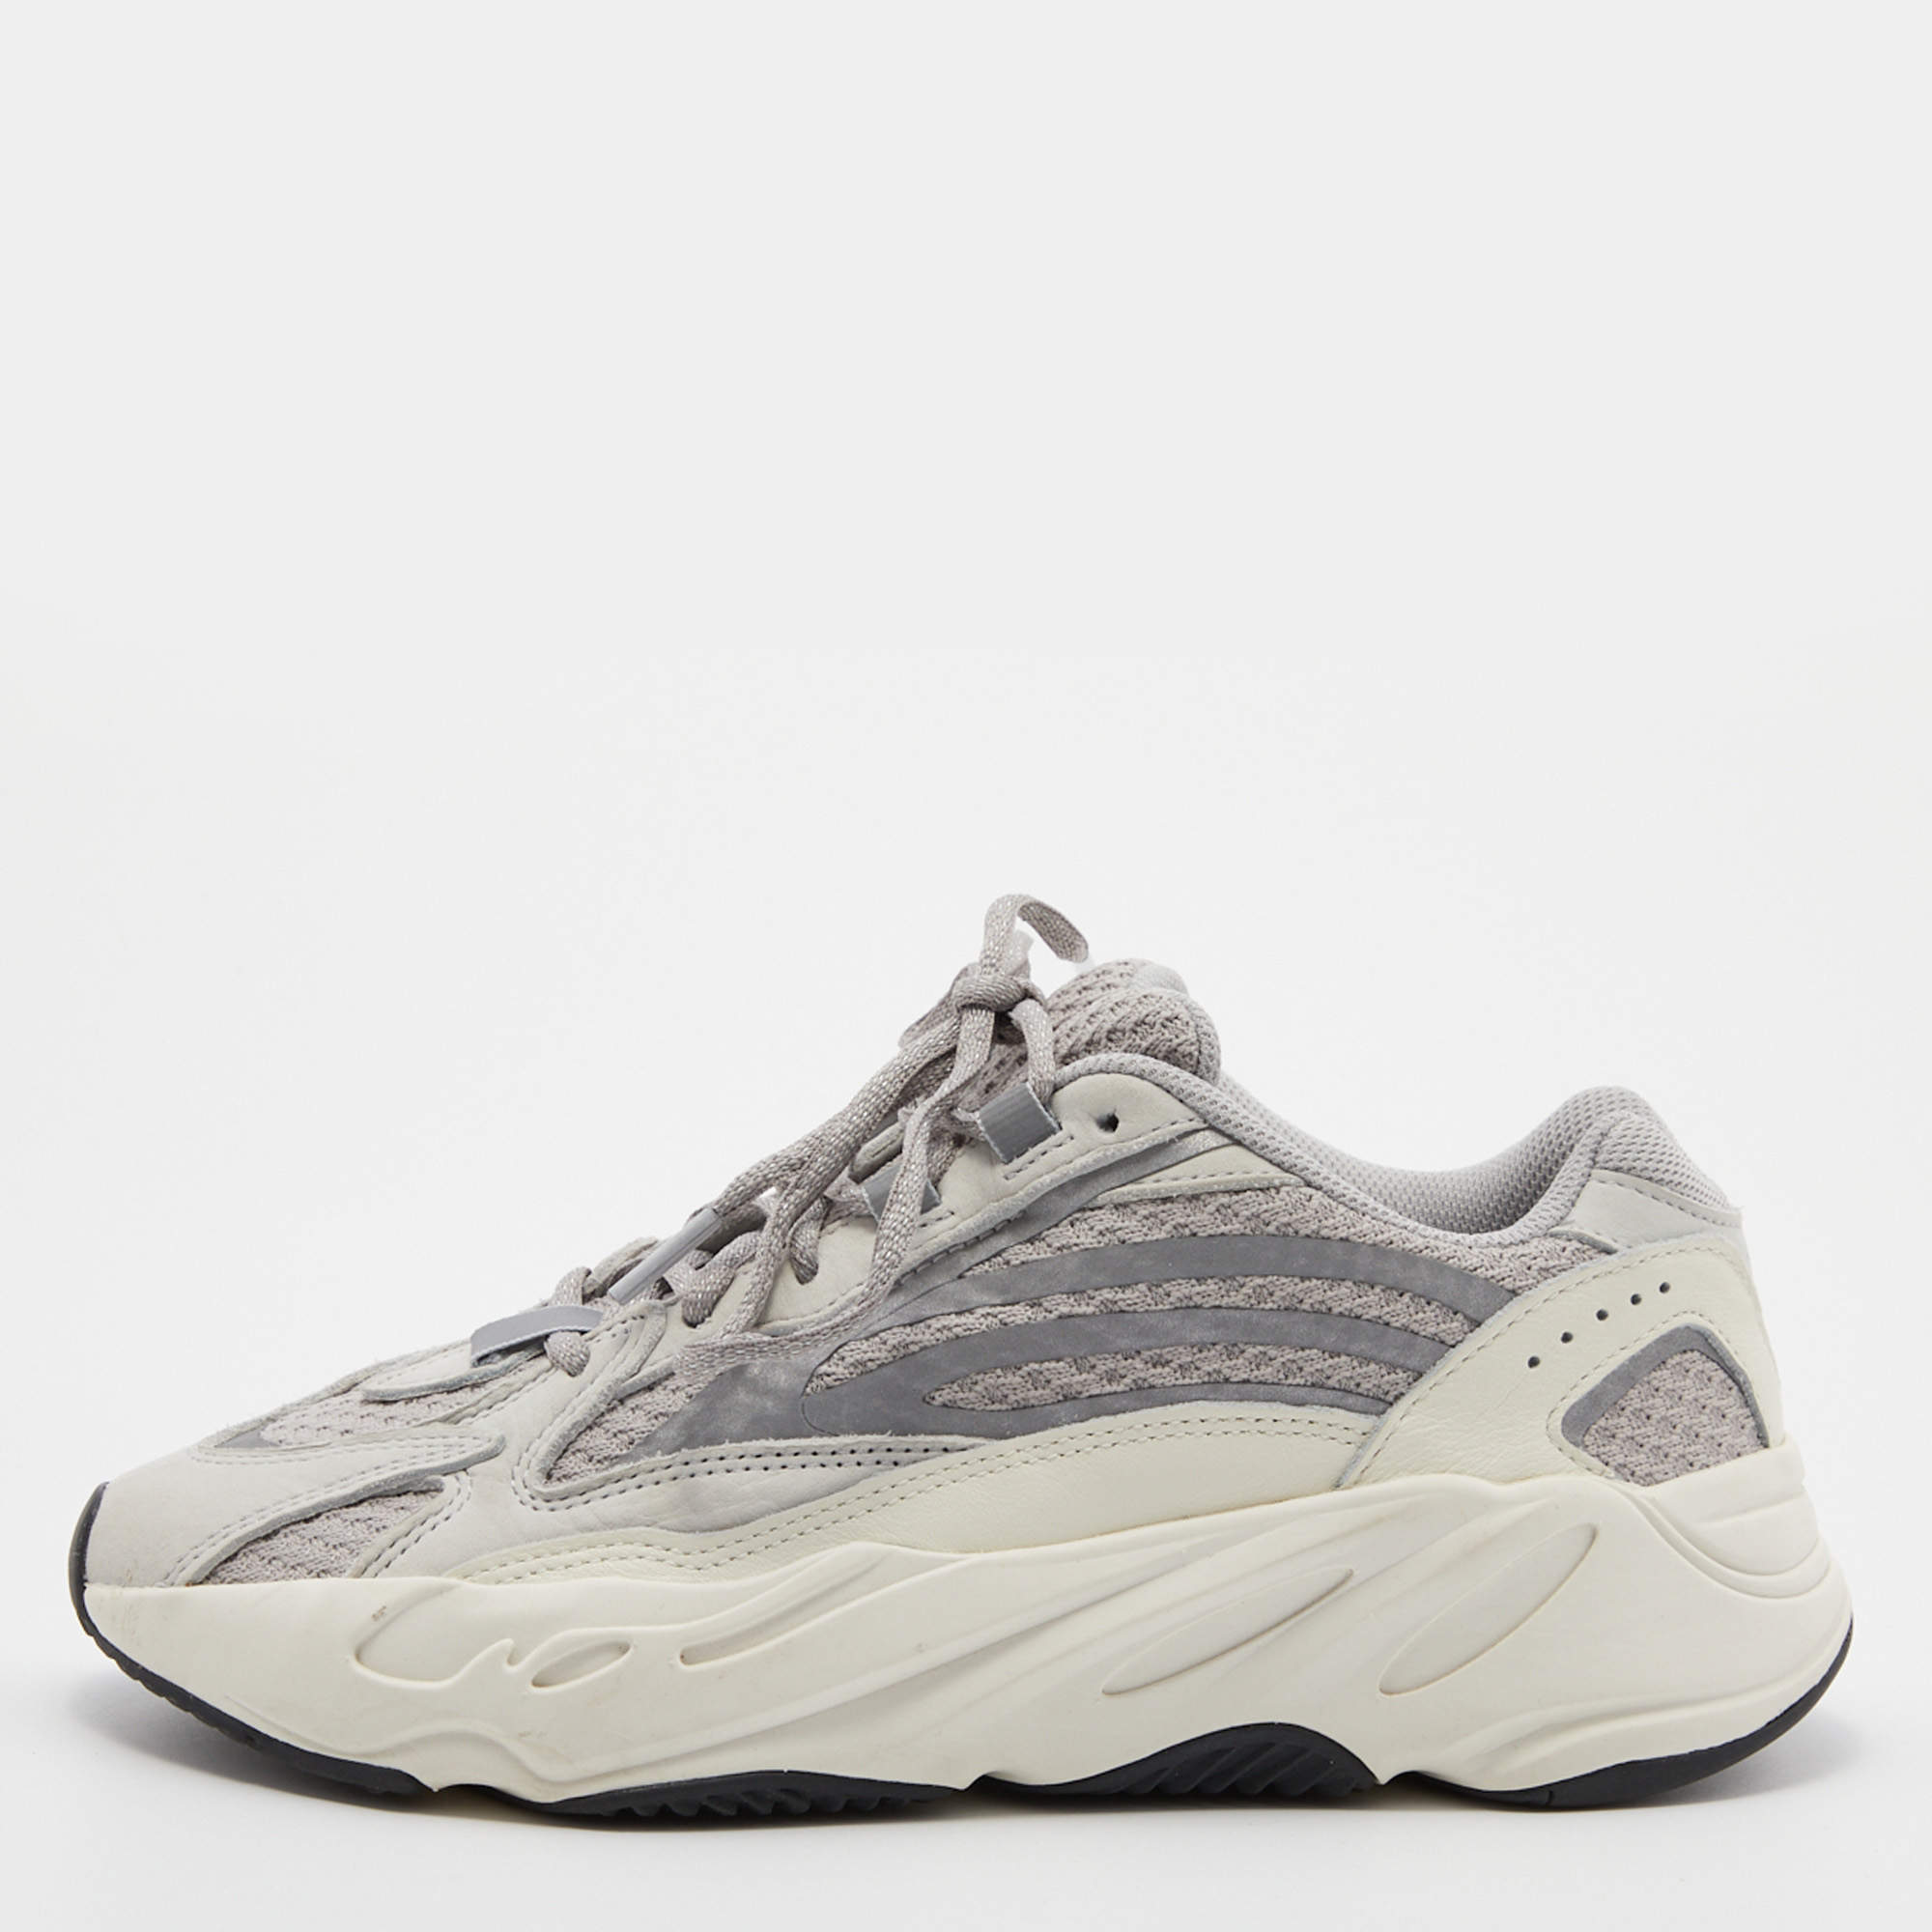 agencia Especificidad Cilios Yeezy x adidas Grey/Off-White Knit Fabric, Nubuck and Leather Boost 700 V2  Static Sneakers Size 40 2/3 Yeezy x Adidas | TLC